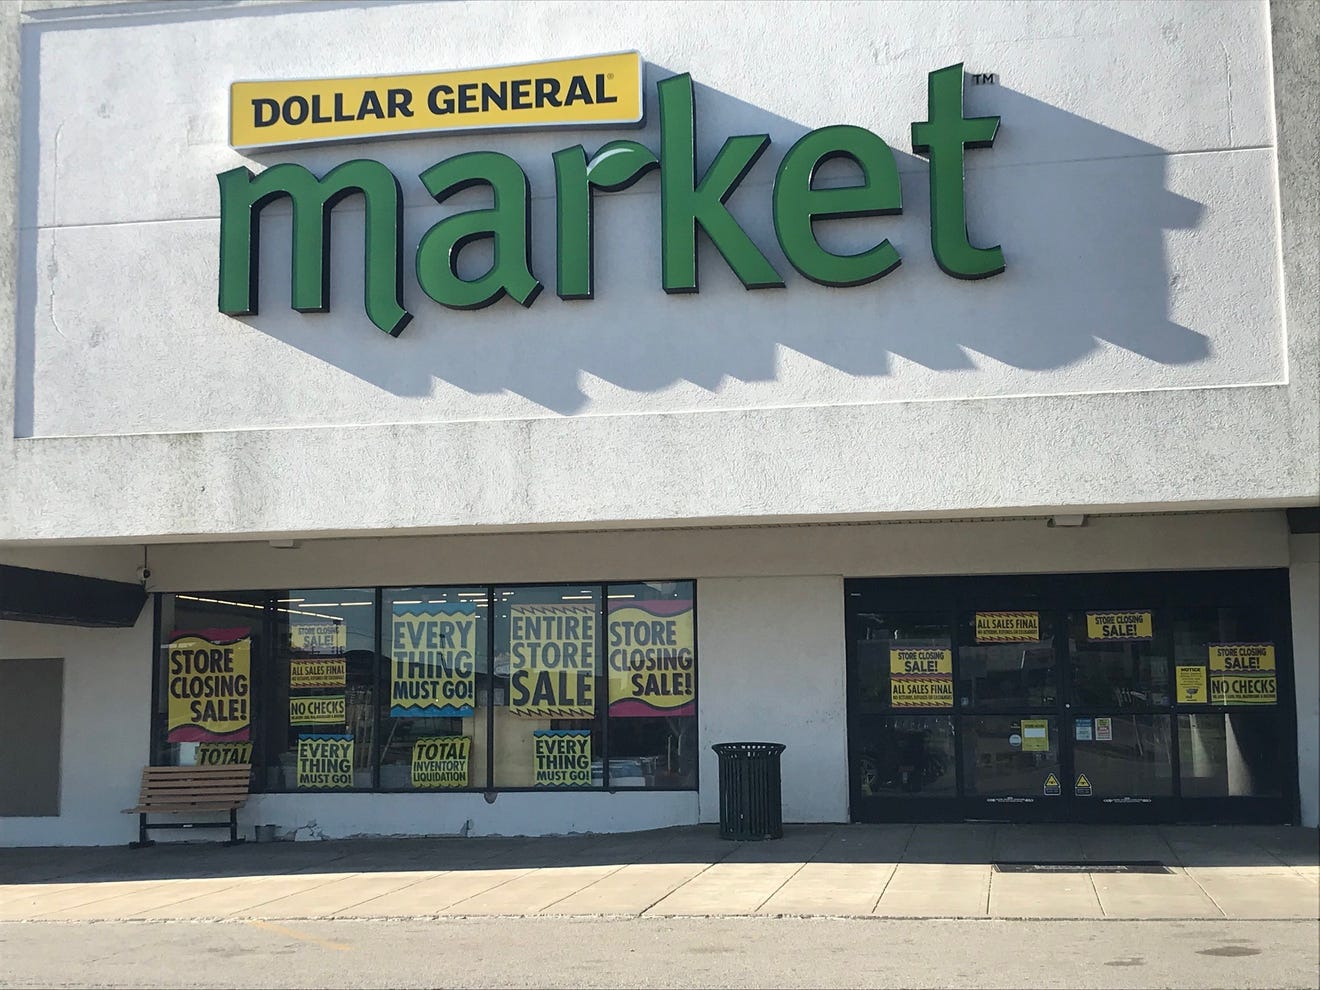 Dollar General Market closing next month in West Park Shopping Center